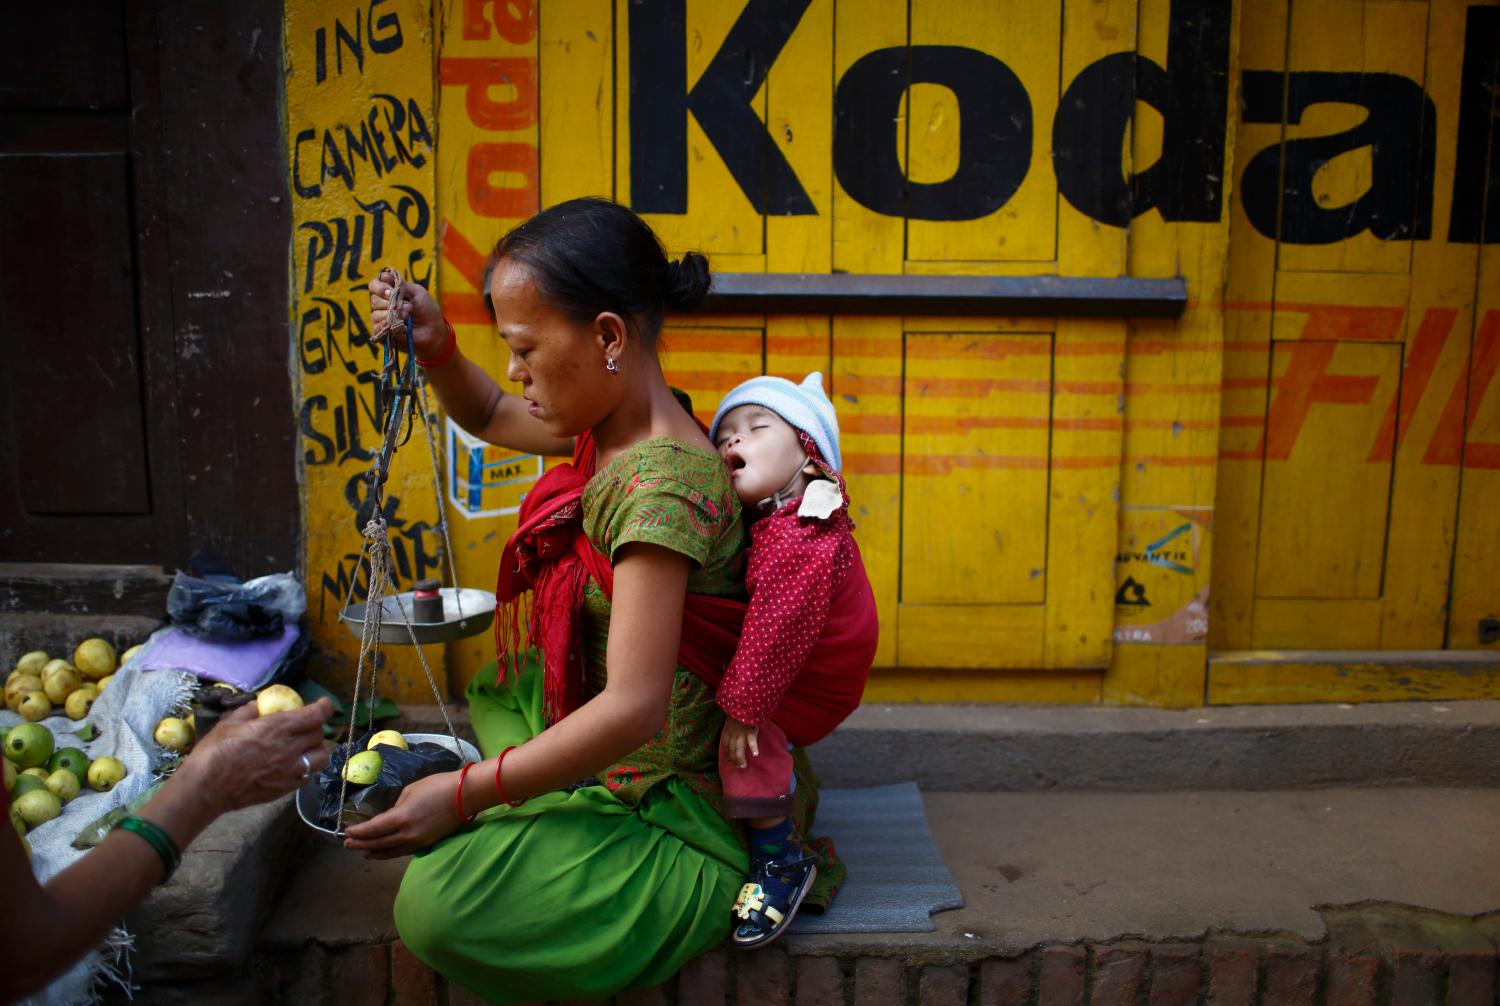 A child sleeps on the back of her mother as she sells fruits to customers along the streets in the ancient city of Bhaktapur, near Nepal's capital Kathmandu September 23, 2013. REUTERS/Navesh Chitrakar (NEPAL - Tags: SOCIETY)